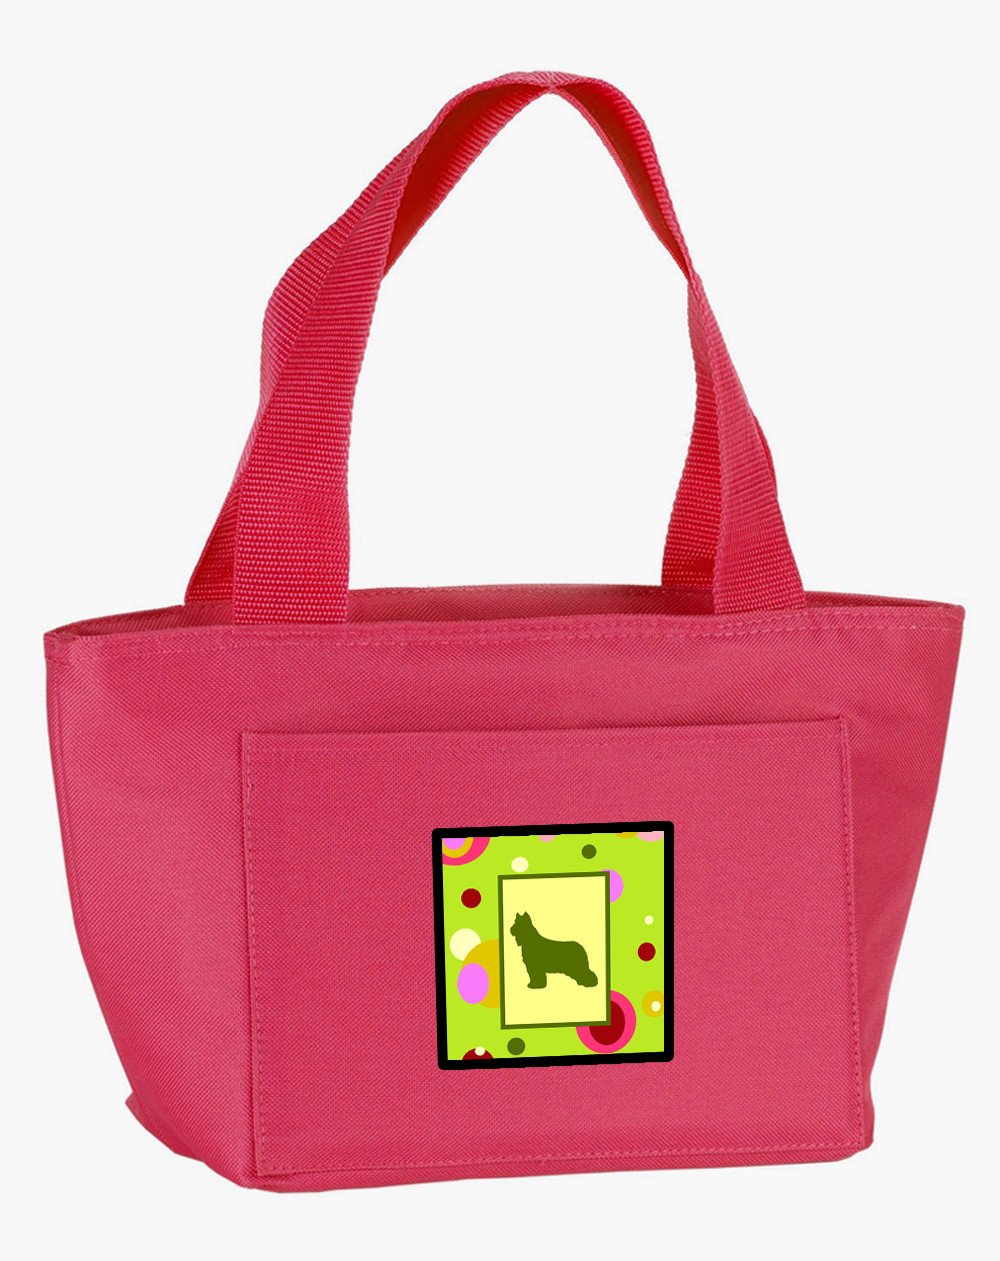 Lime Green Dots Briard Lunch Bag CK1121PK-8808 by Caroline's Treasures